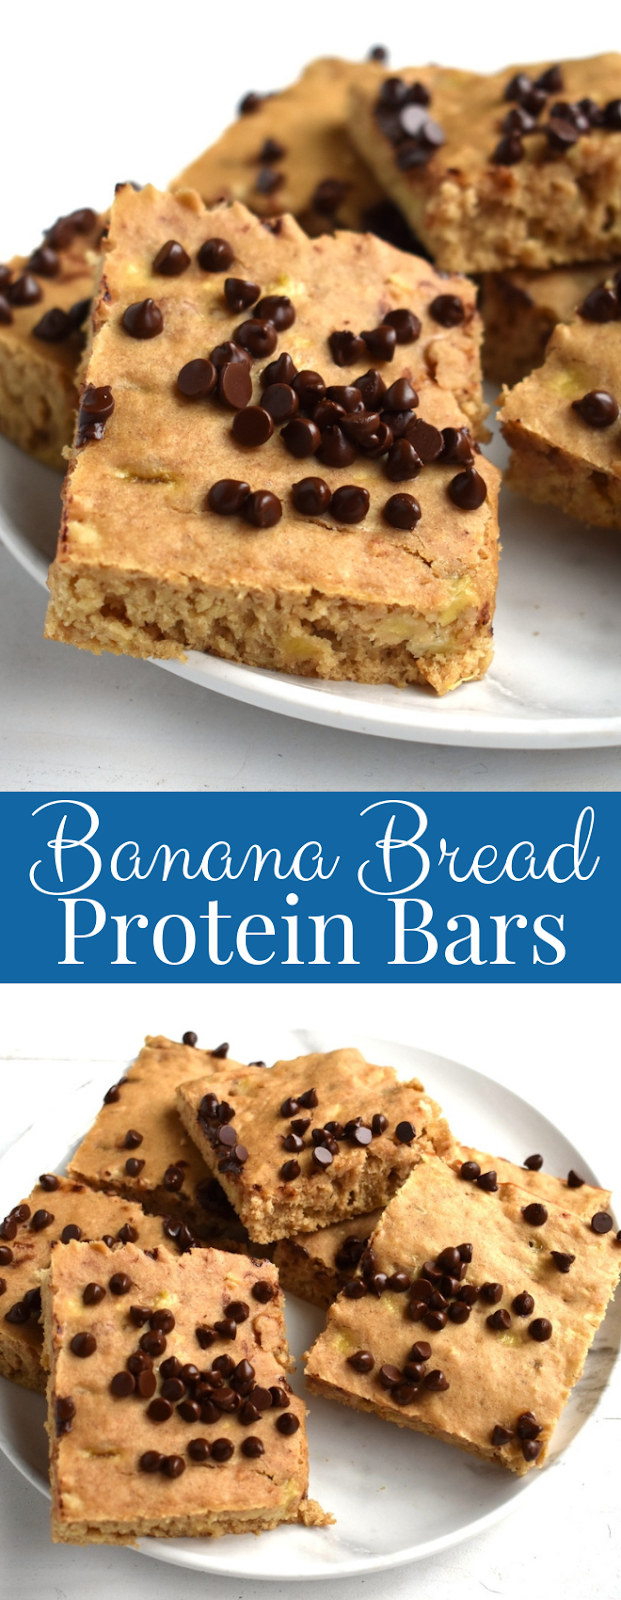  Banana Bread Protein Bars have everything you love about banana bread but in bar form! They are whole-wheat, high in protein and fiber and make the perfect snack! #protein #cleaneating #healthy #snack #bananas #bananabread